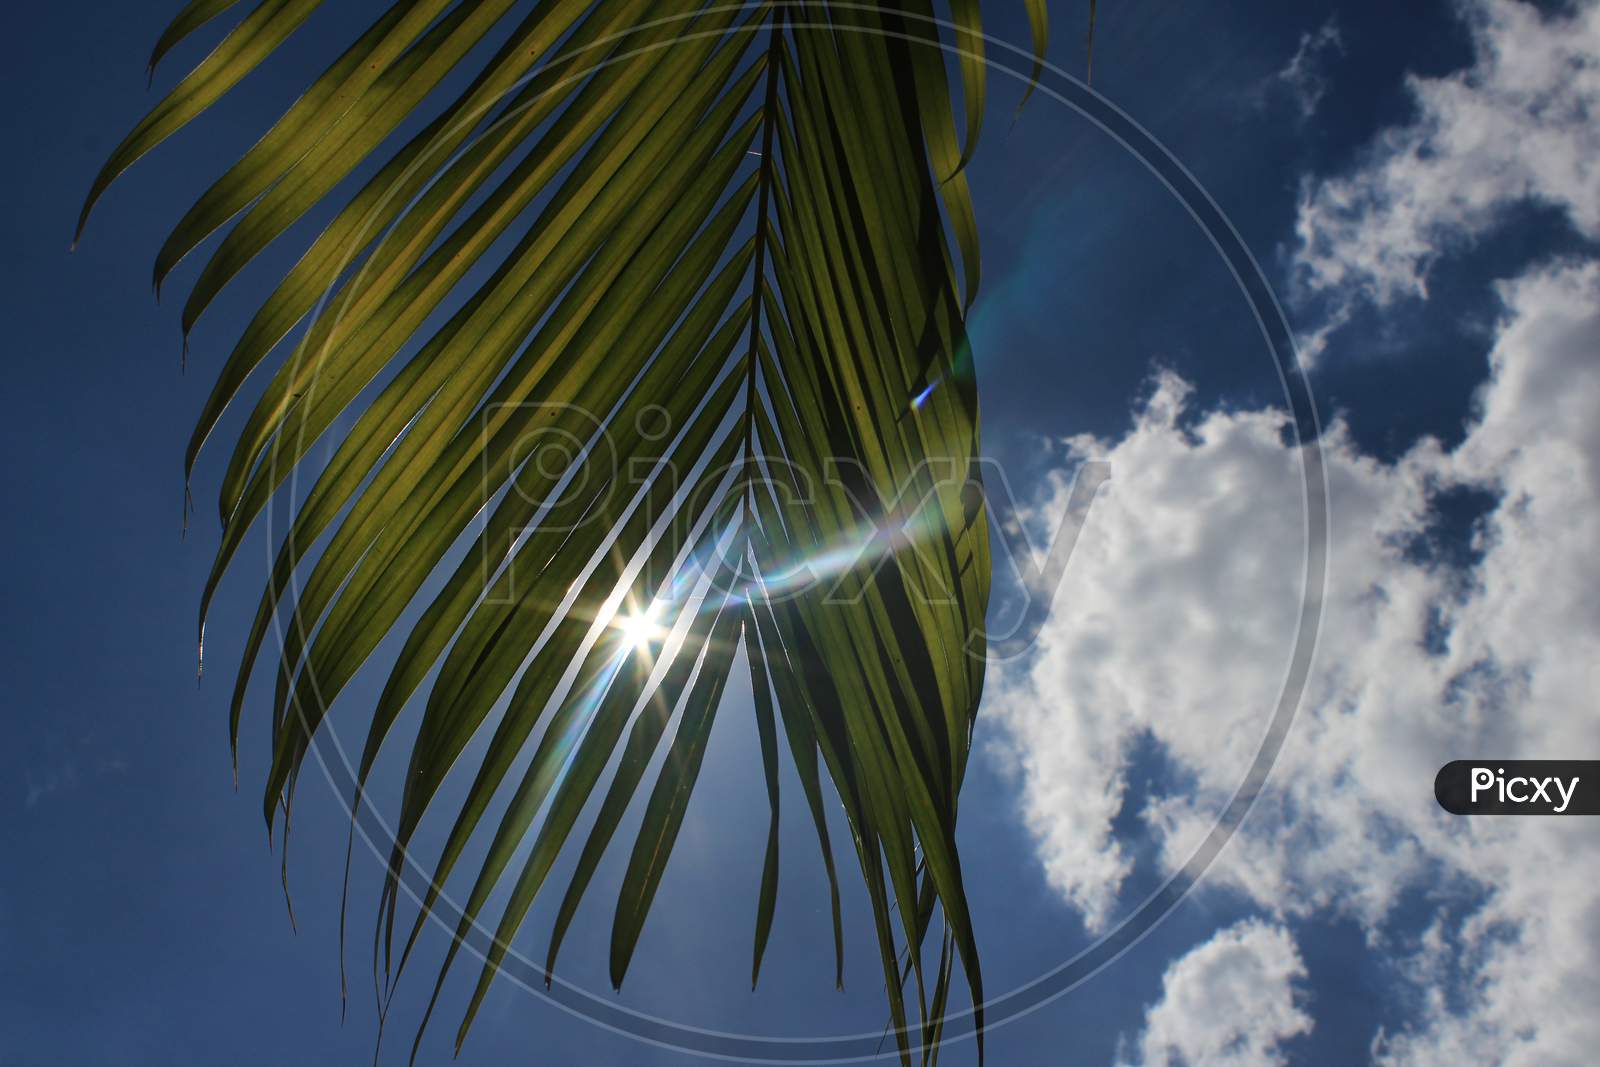 The Sun Rays On Green Palm Leaves With Blue Clouds In The Background. Sun Rays On The Green Leafs